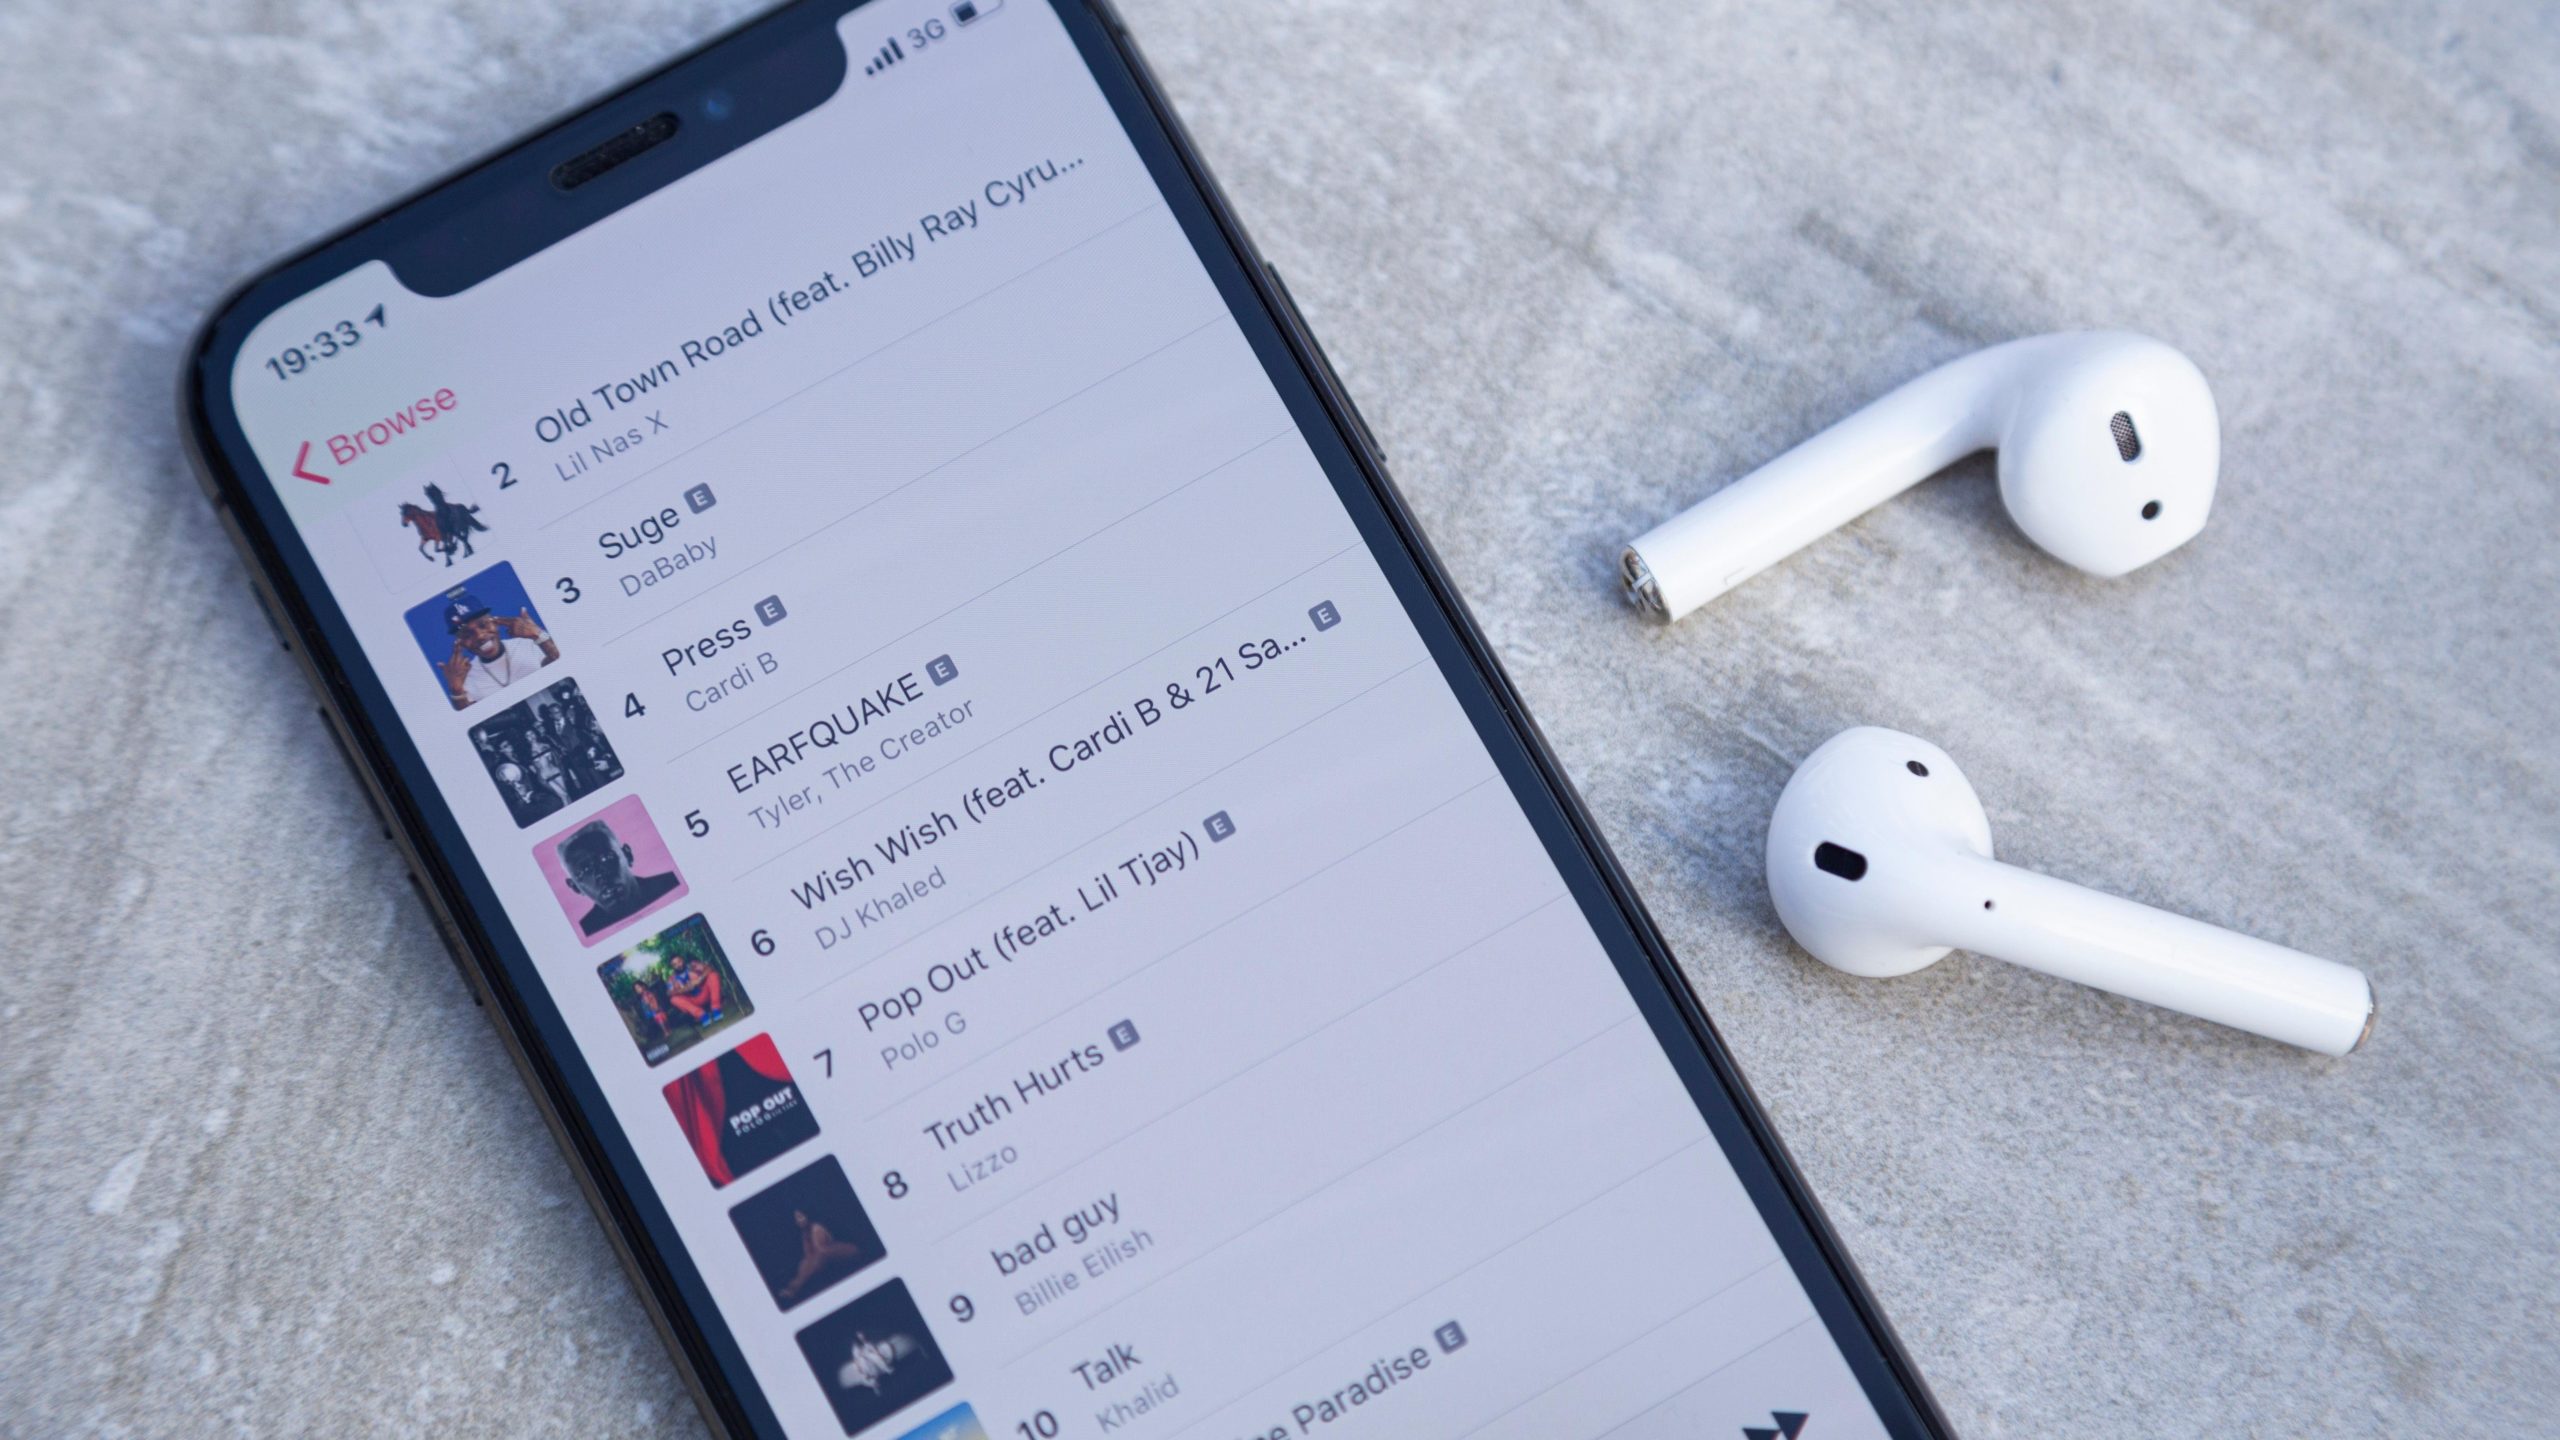 How to Fix the Bug Keeping You From Sharing Apple Music to Instagram